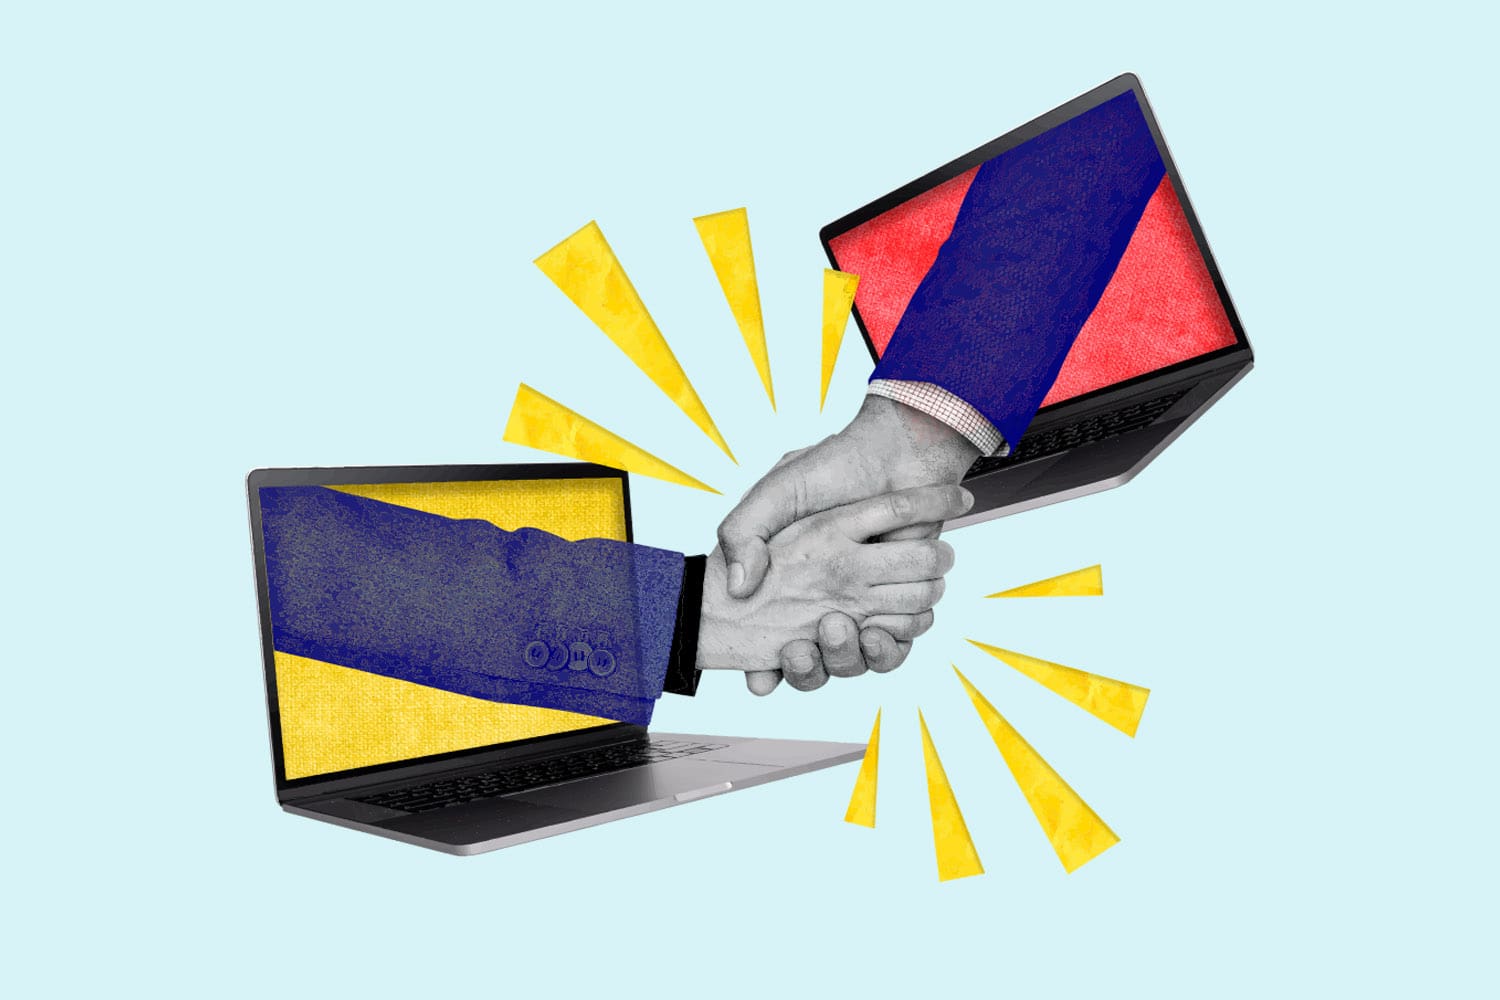 Two laptops, one with a blue sleeve and the other with a red sleeve, are depicted shaking hands, symbolizing a digital agreement or collaboration. Yellow bursts highlight the handshake.